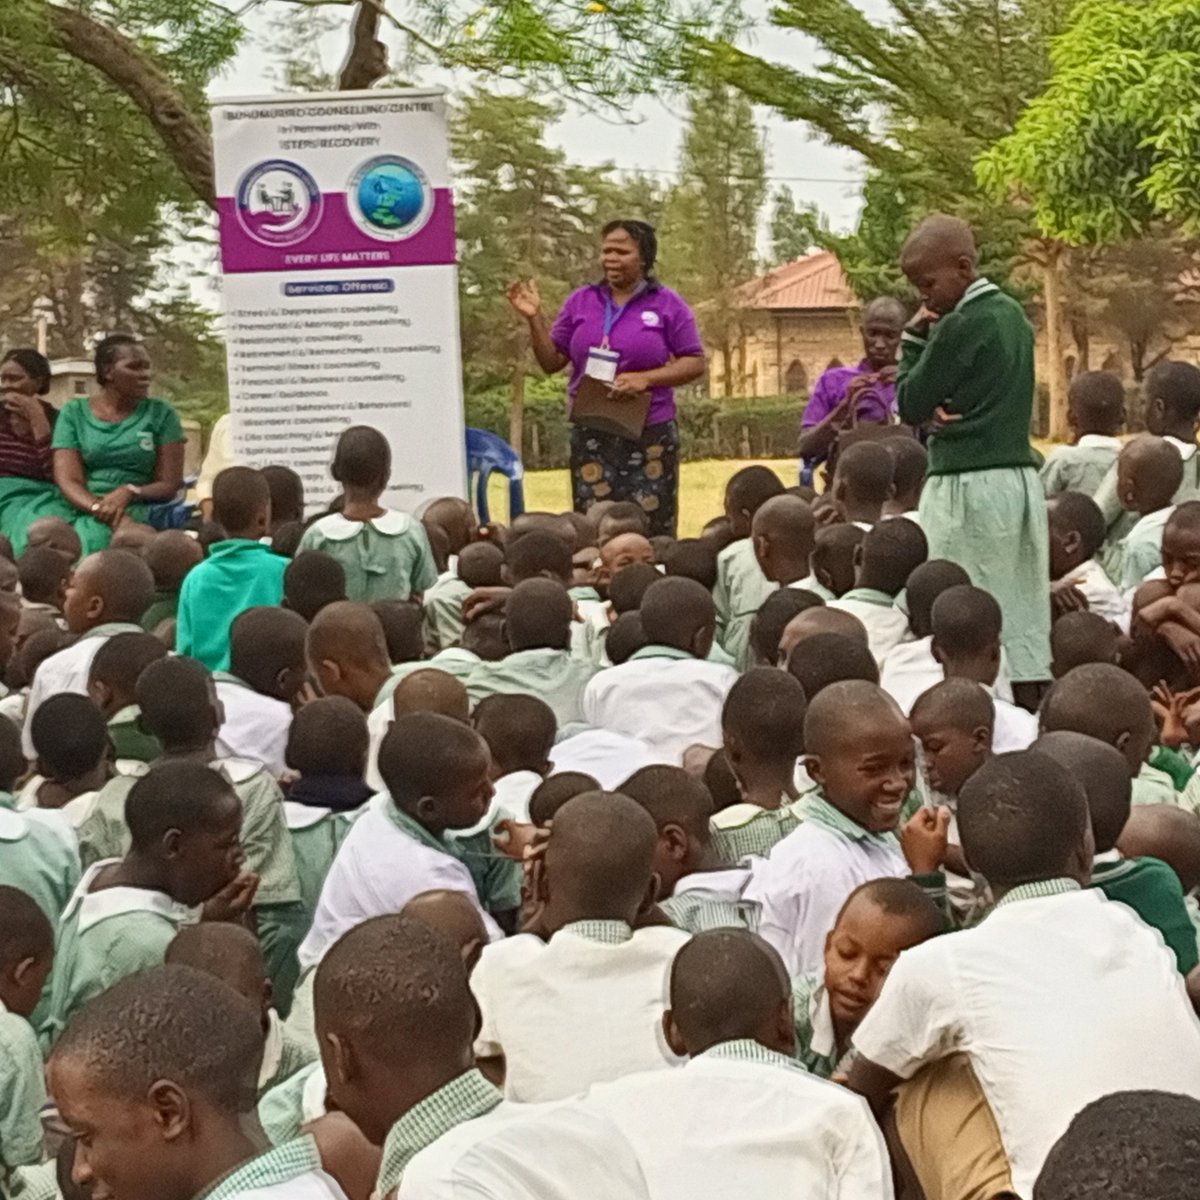 Yesterday with the team from Buhumuriro counseling center, we were at Nyamityobora Primary school,sharing about Mental health with pupils & teachers,
I was happy to give a talk about refocusing & stress management in order to succeed in life. 
#MentalHealthAwareness